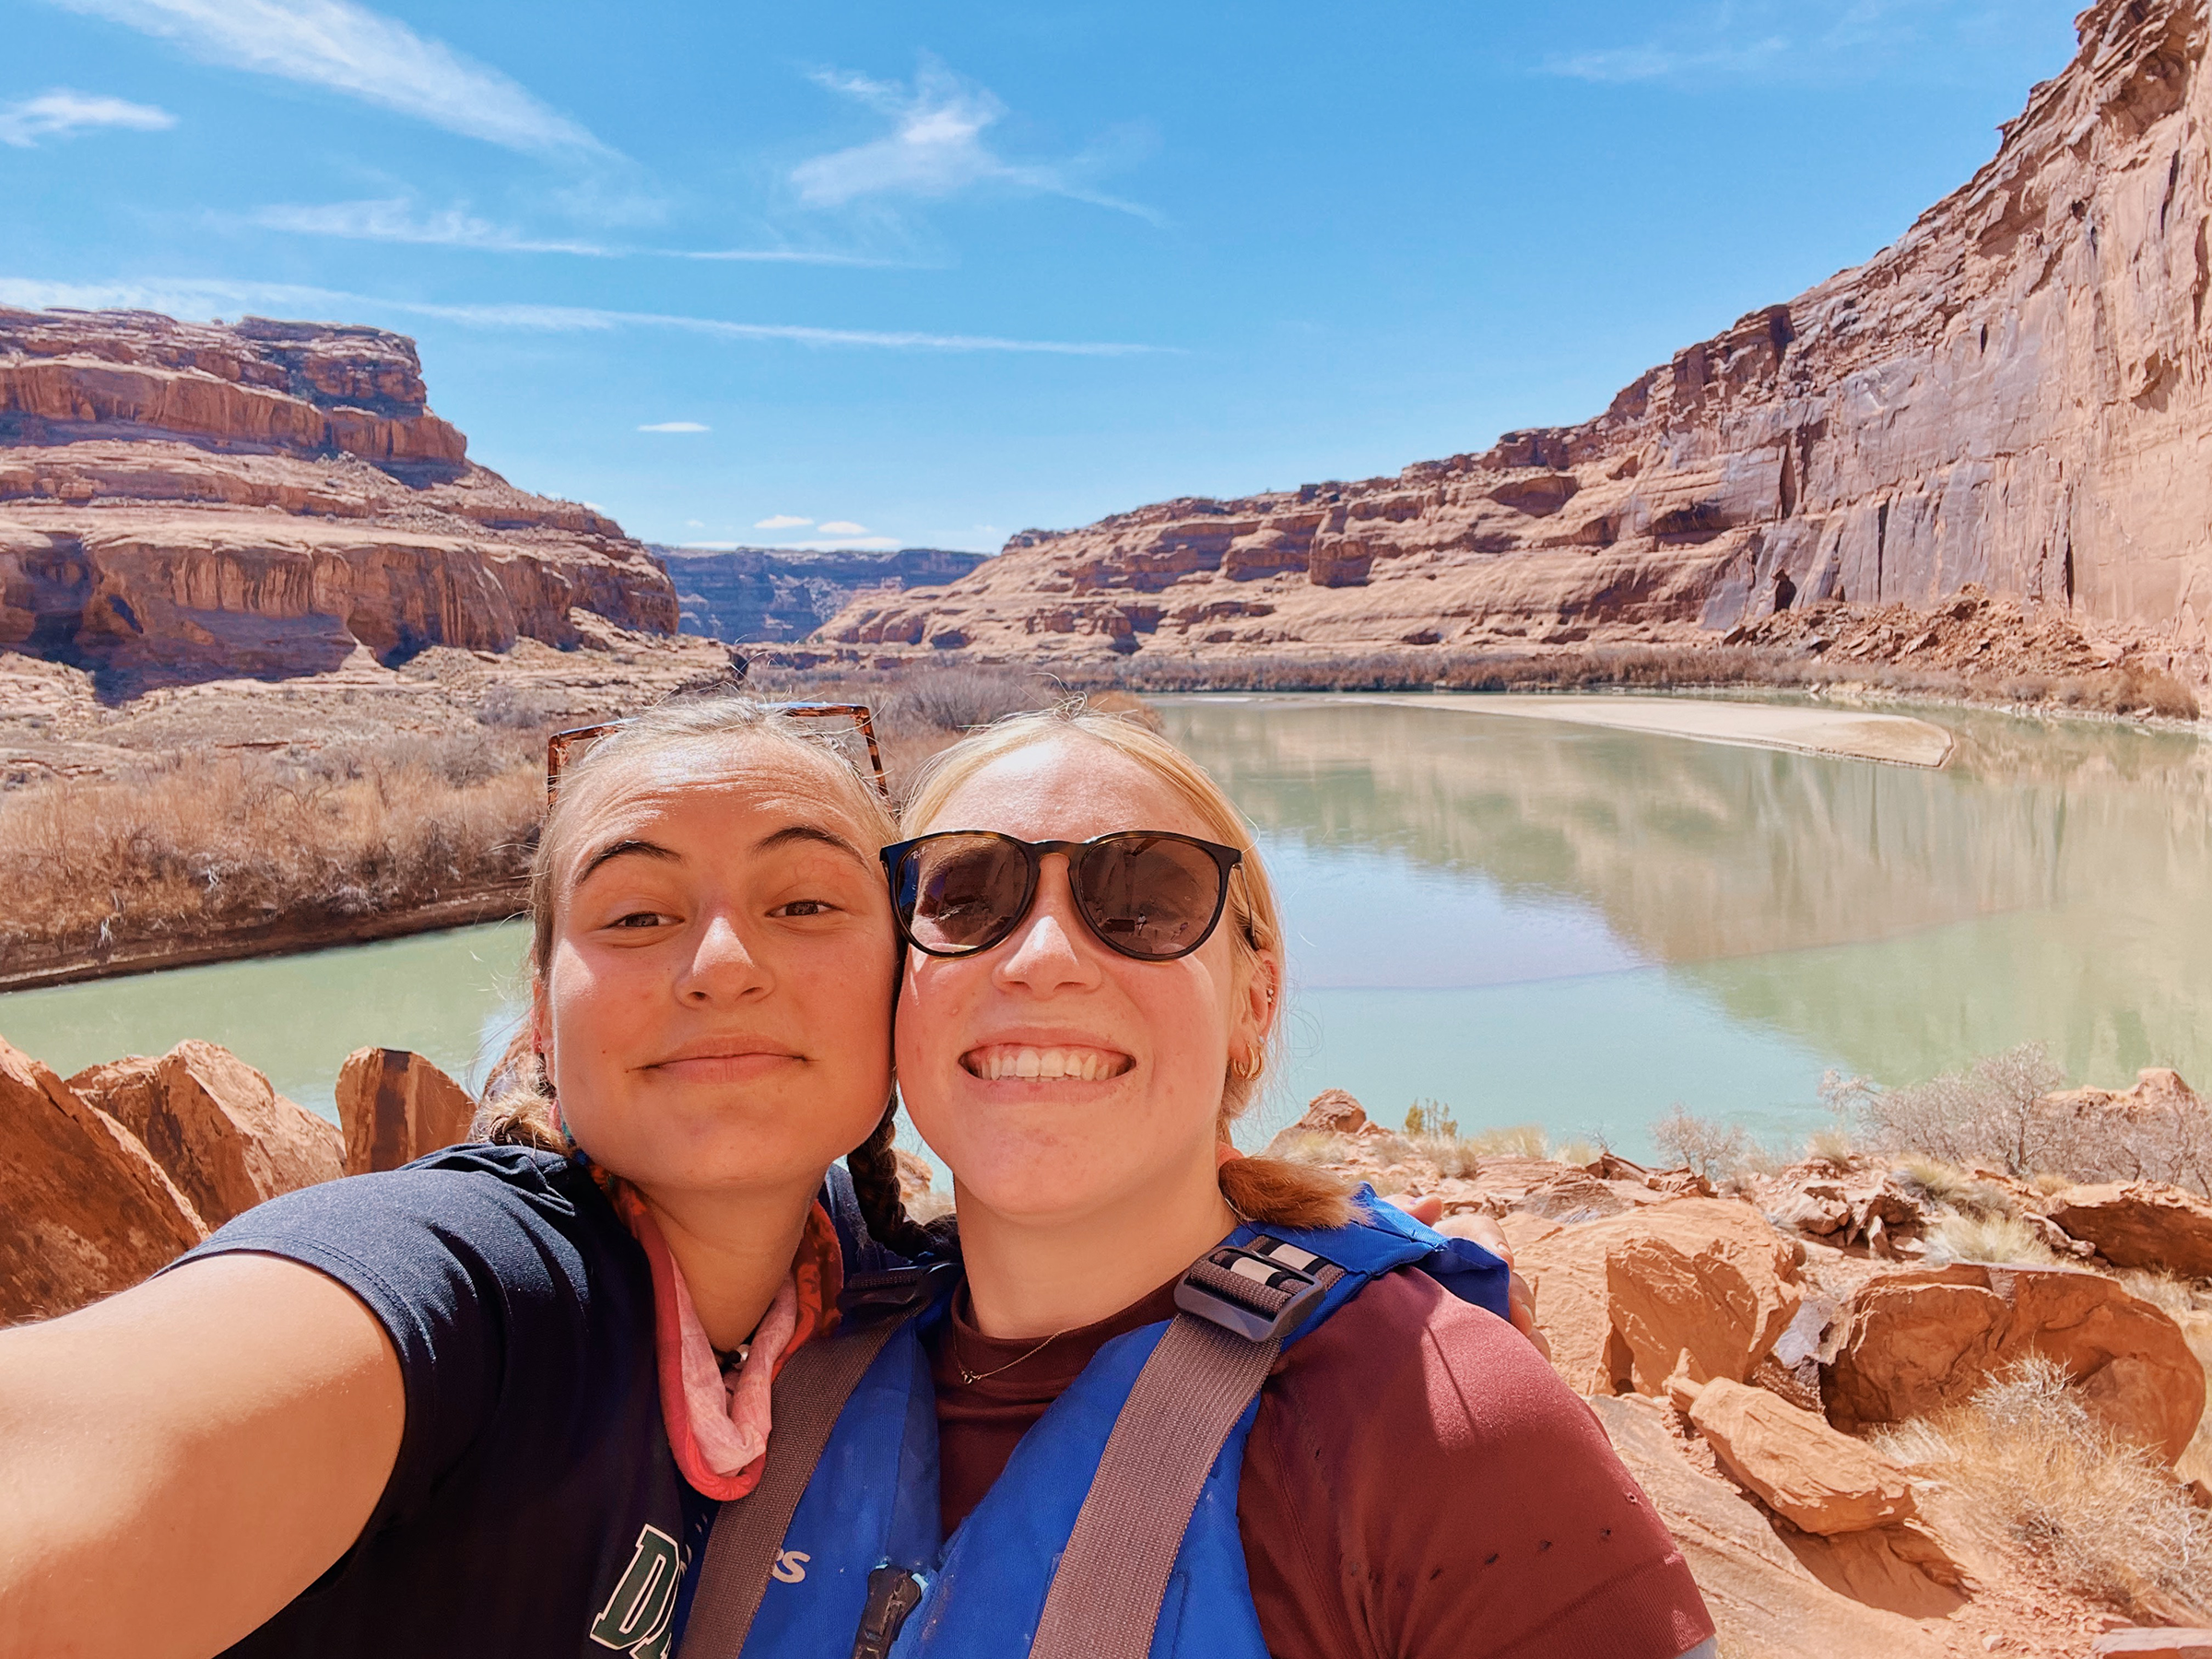 Two people smiling in front of a canyon.